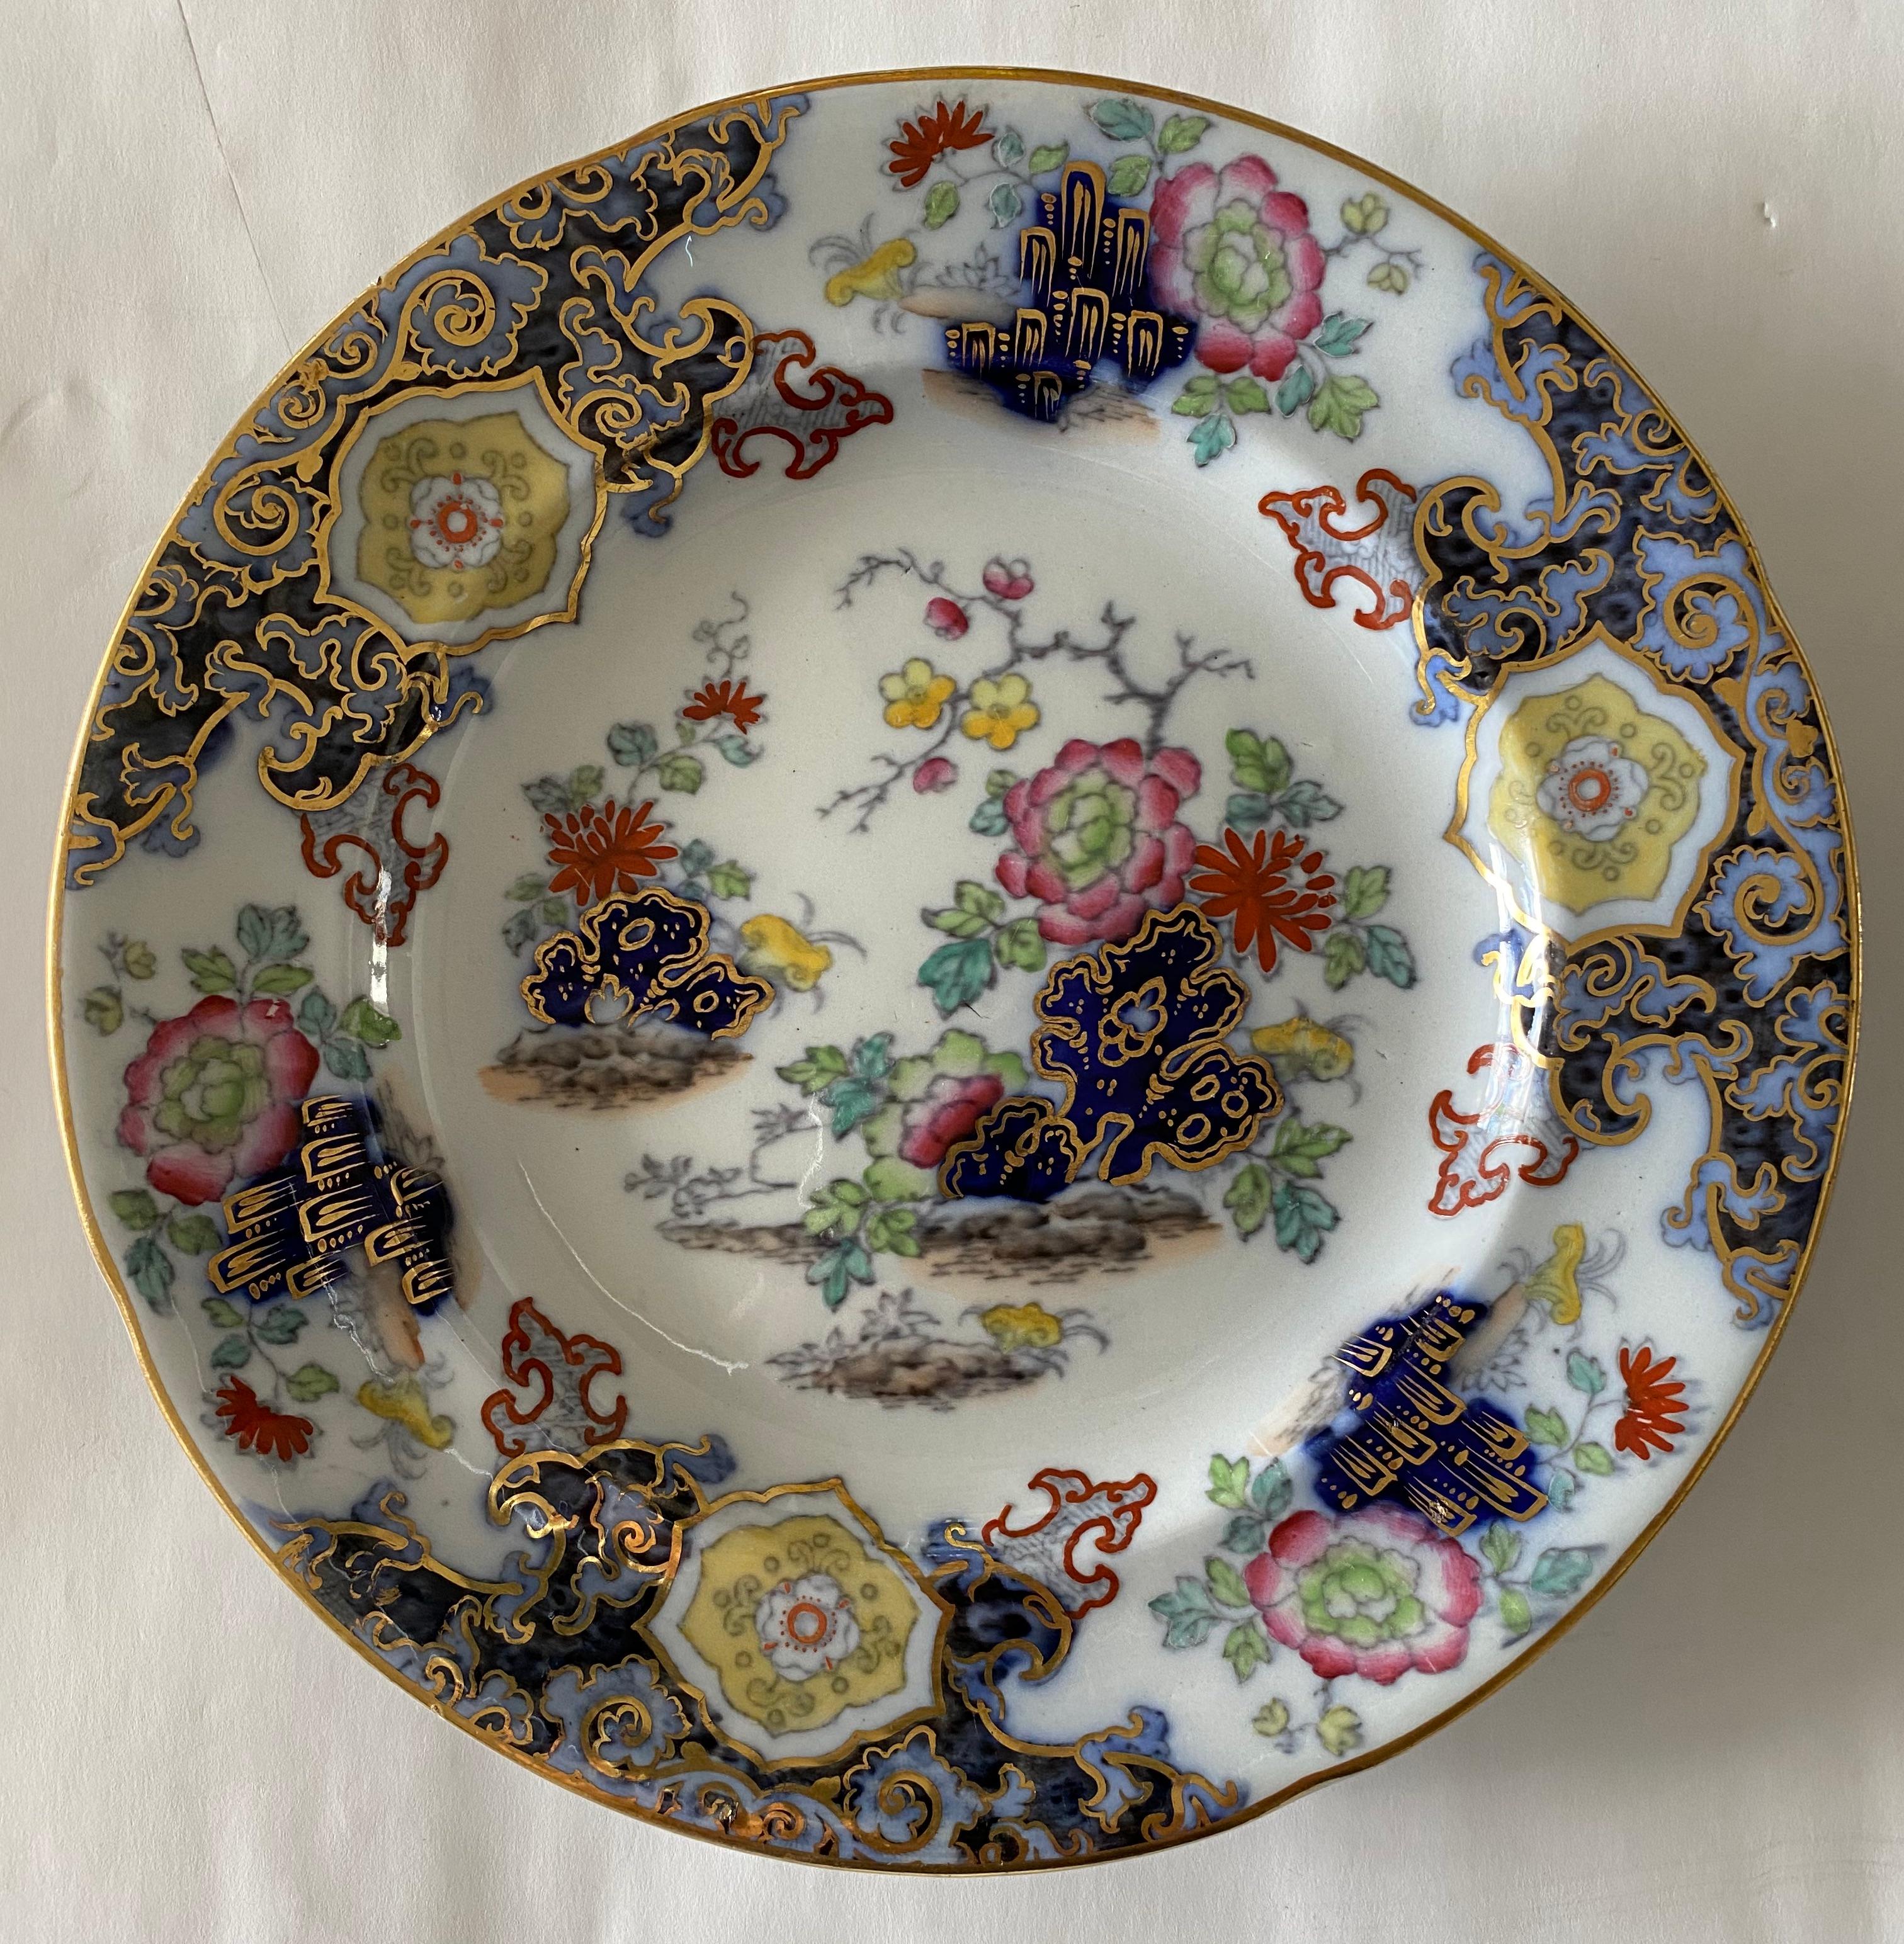 Set of 8 ironstone china plates in a flamboyent and colorful floral chinoiserie pattern with motifs of chrysanthemums and lotus flowers, cherry blossoms and peonies. The coloration includes gilt, rich blues, pinks, yellows and greens.

Rear marks